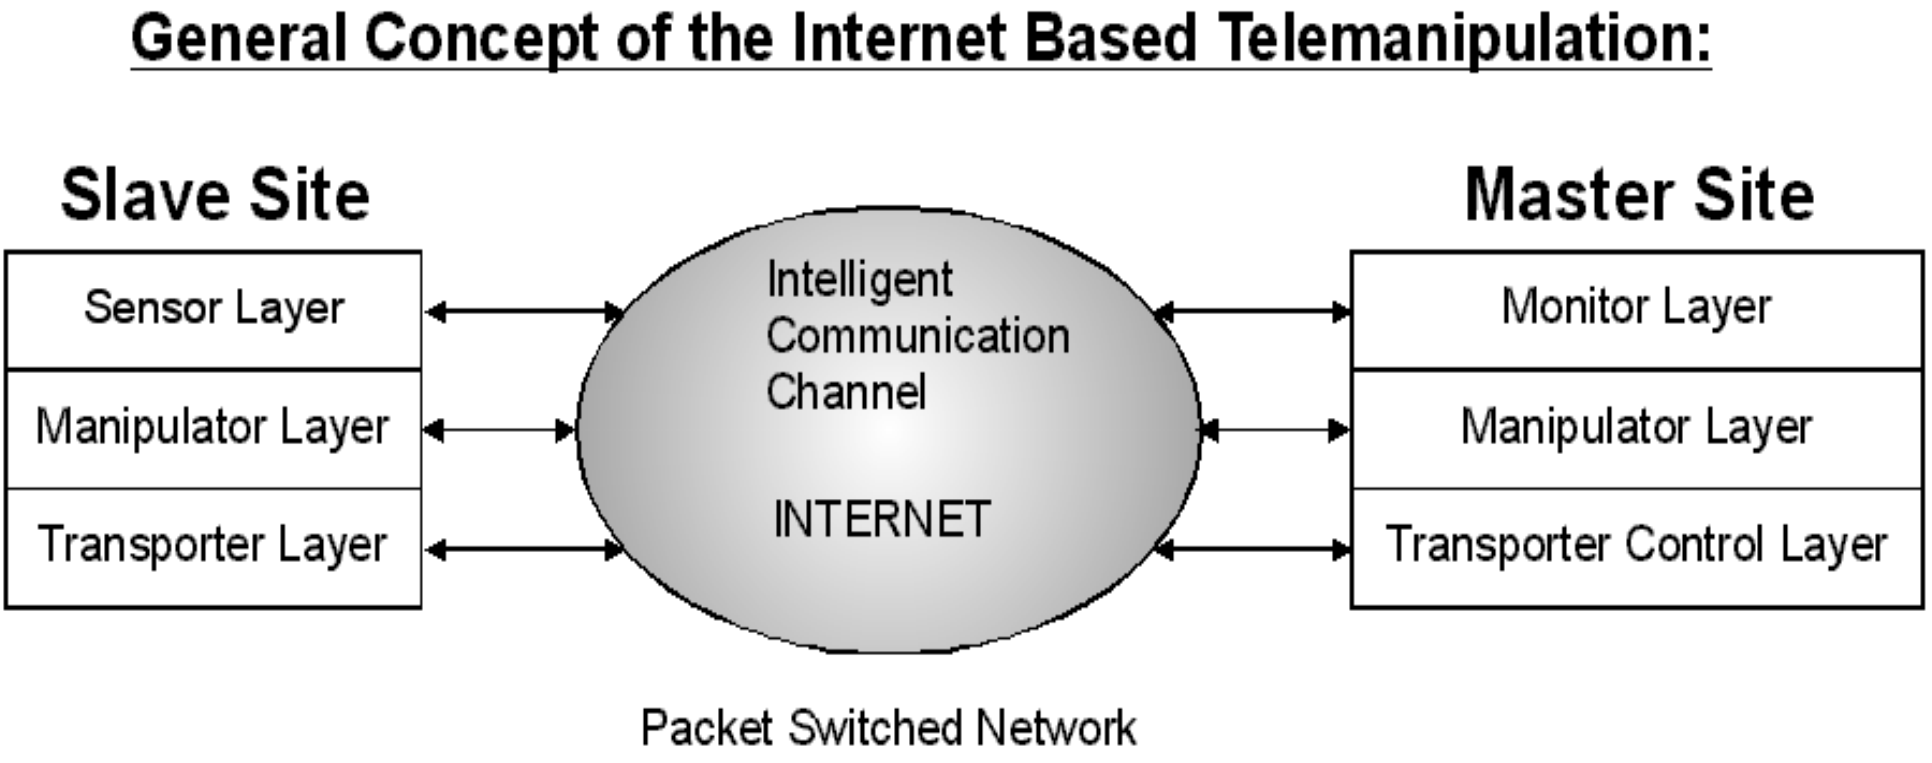 Layer definition for the general concept of the Internet-based Telemanipulation.